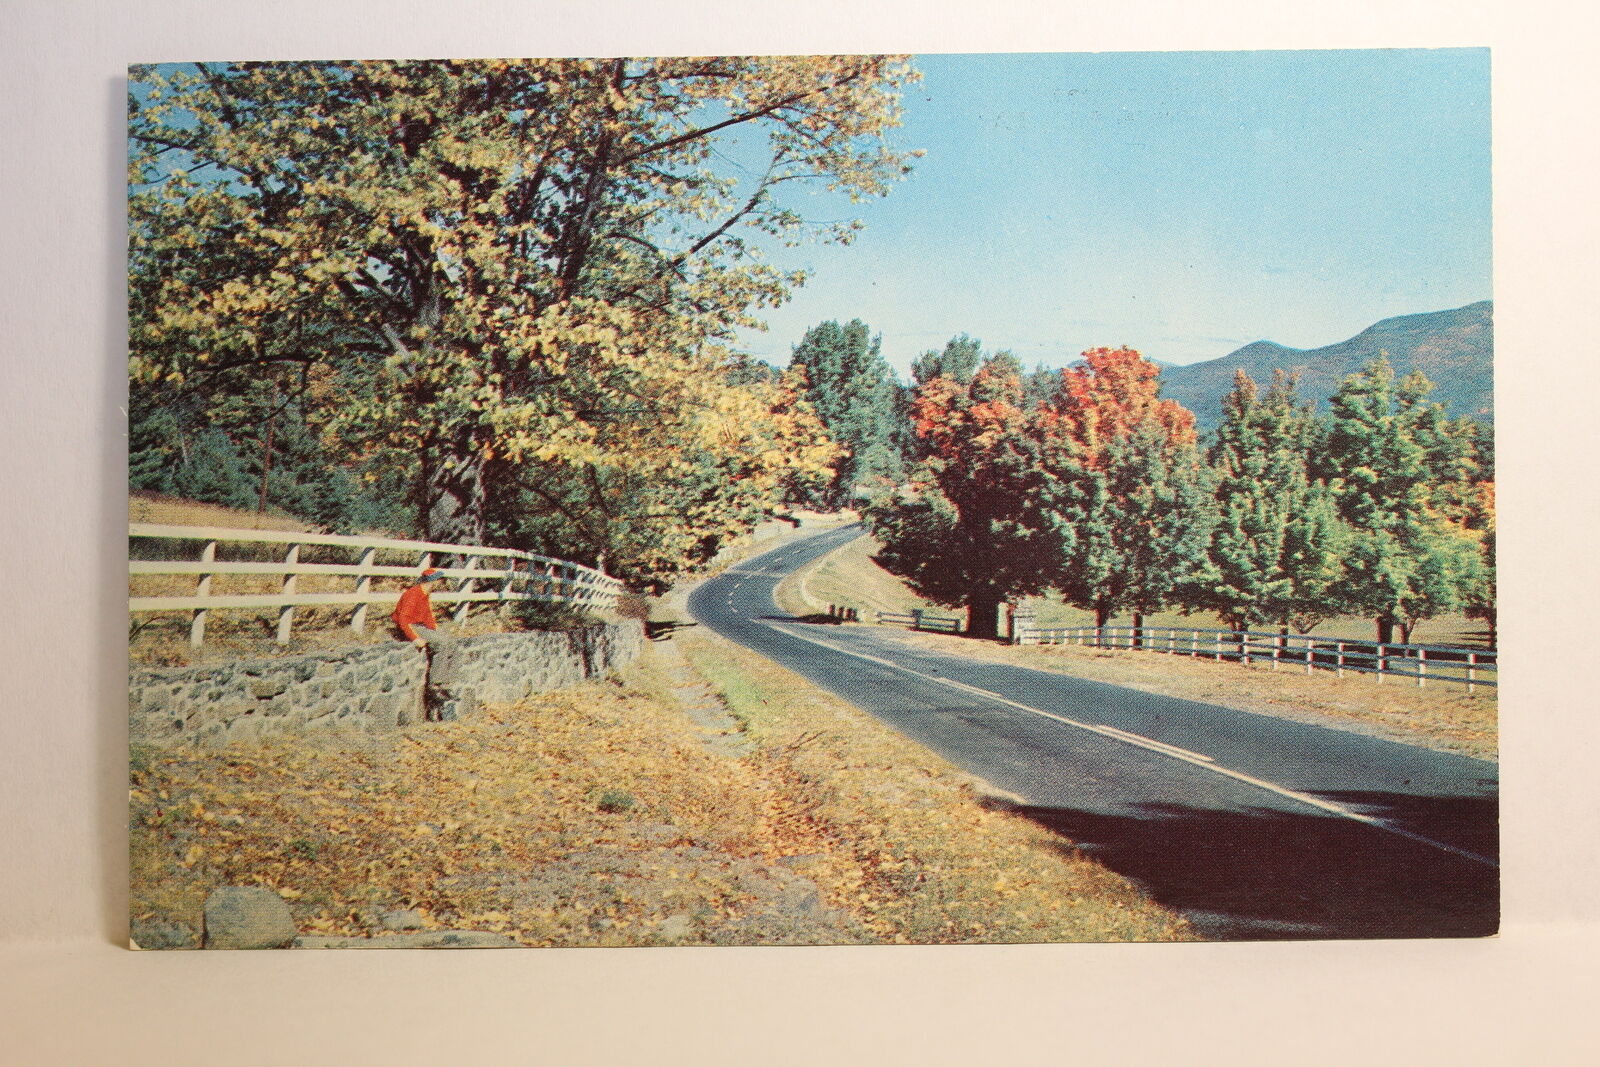 Postcard Typical Highway Scene Greetings From The Pocono Mts. PA G17